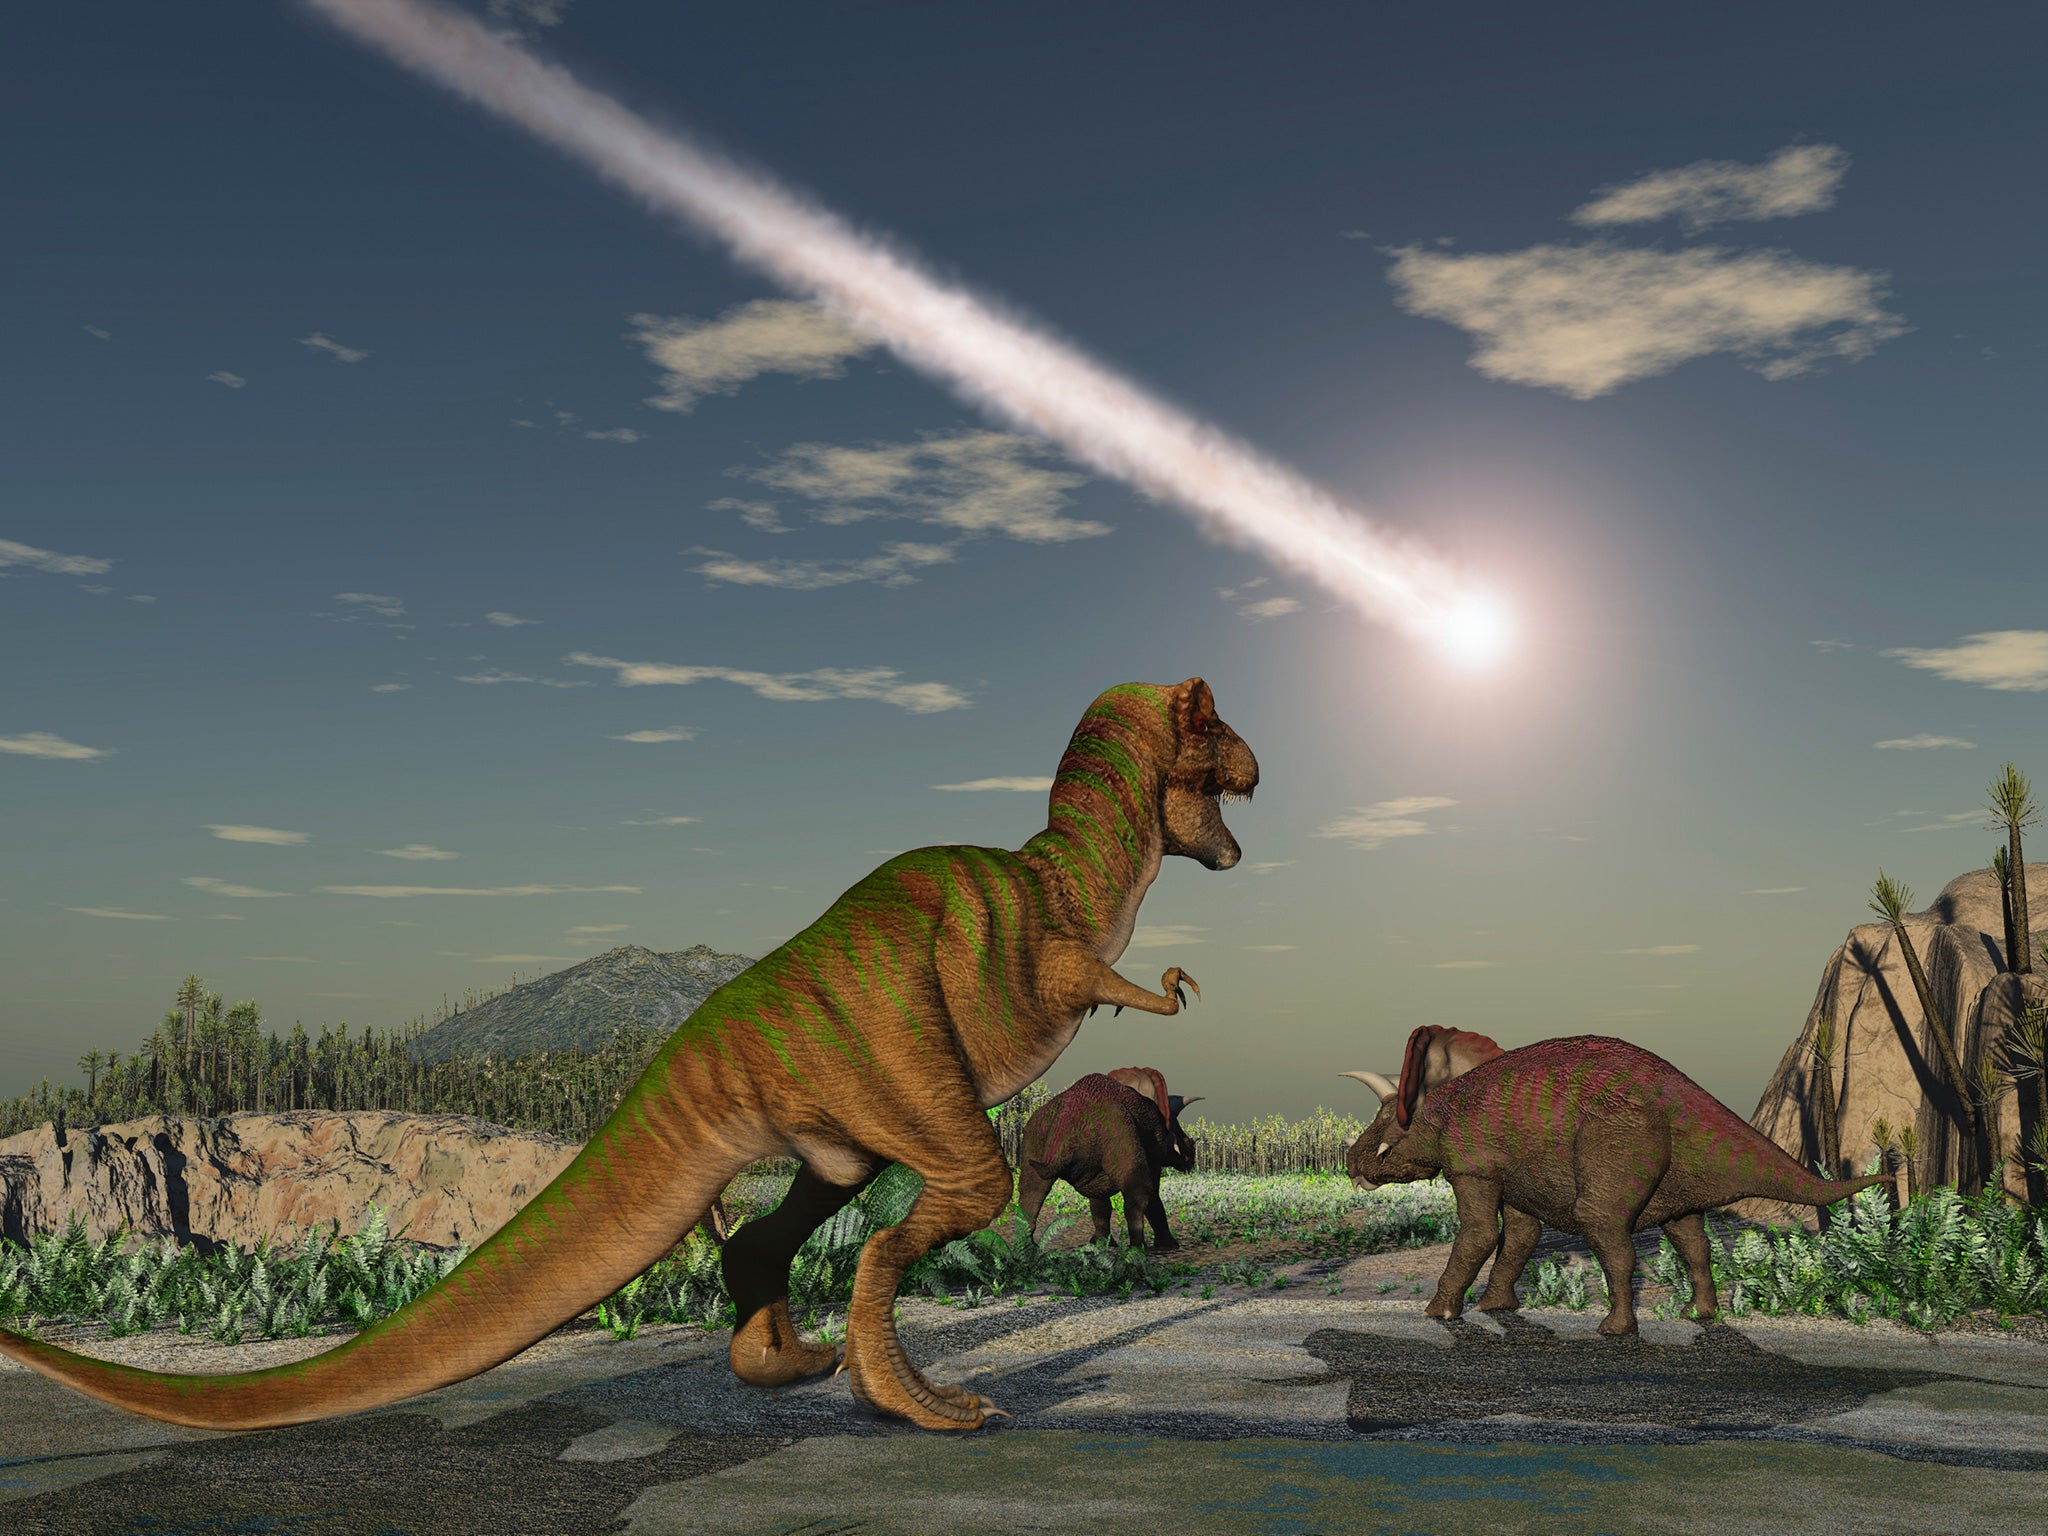 study　Independent　dinosaurs　suggests　before　The　may　arrived,　have　Independent　Volcanoes　out　asteroid　erupting　wiped　The